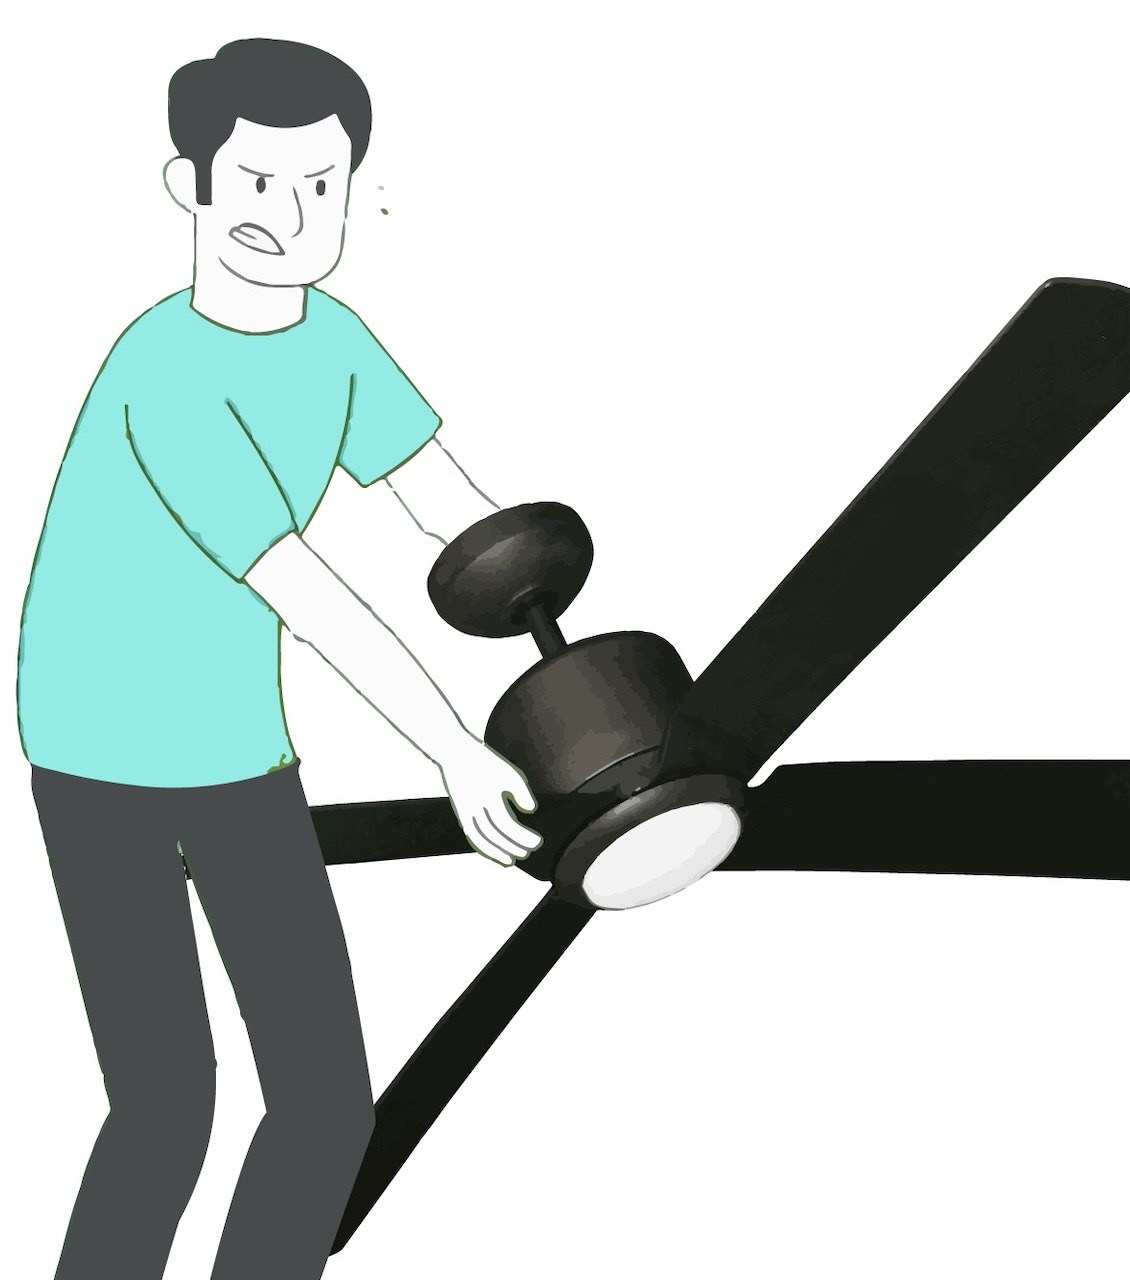 Let LoadUp handle the heavy lifting and take care of proper disposal of your old ceiling fan!